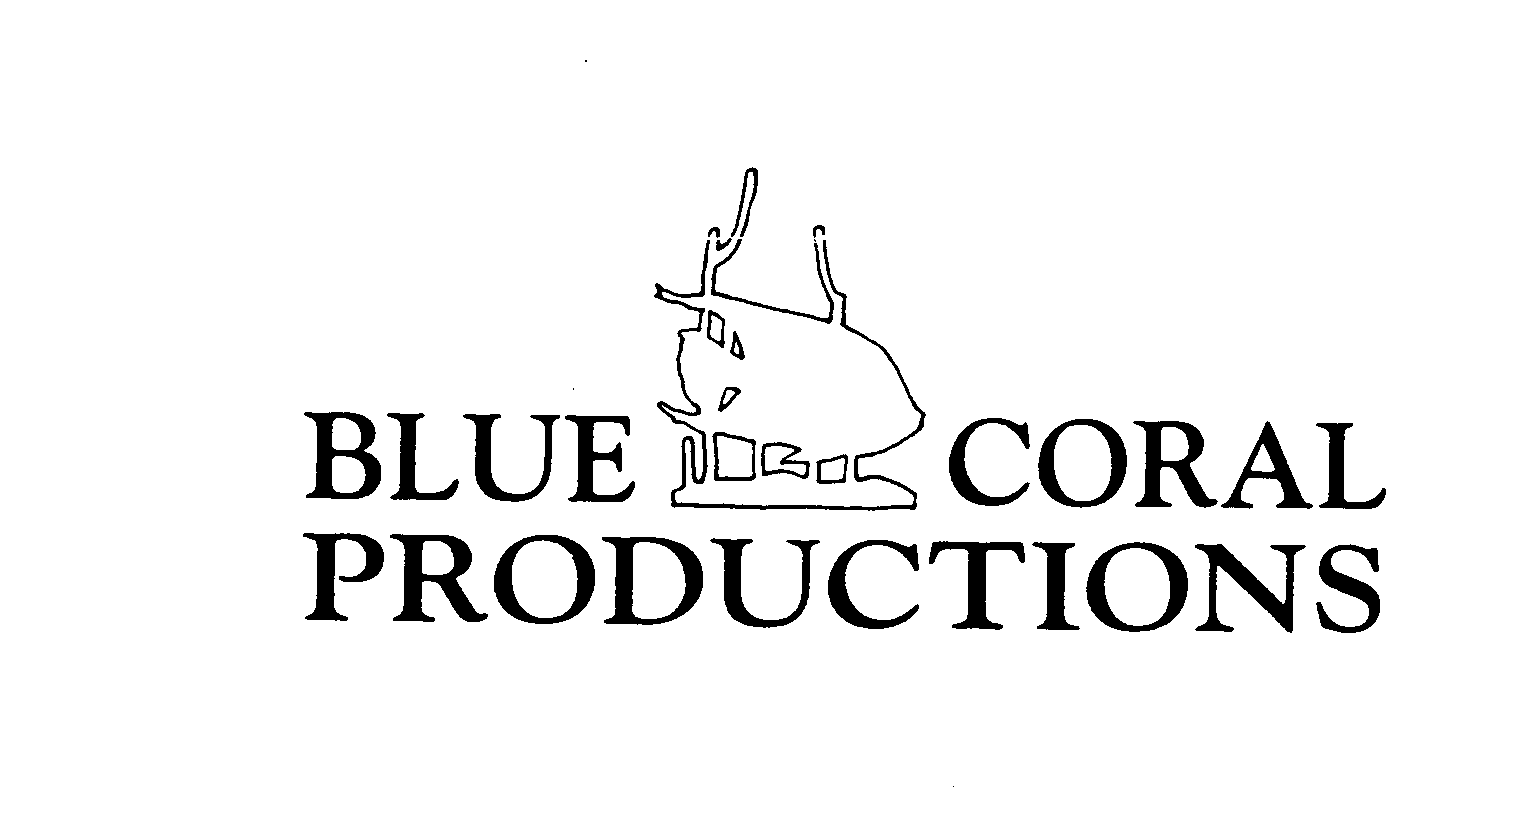  BLUE CORAL PRODUCTIONS